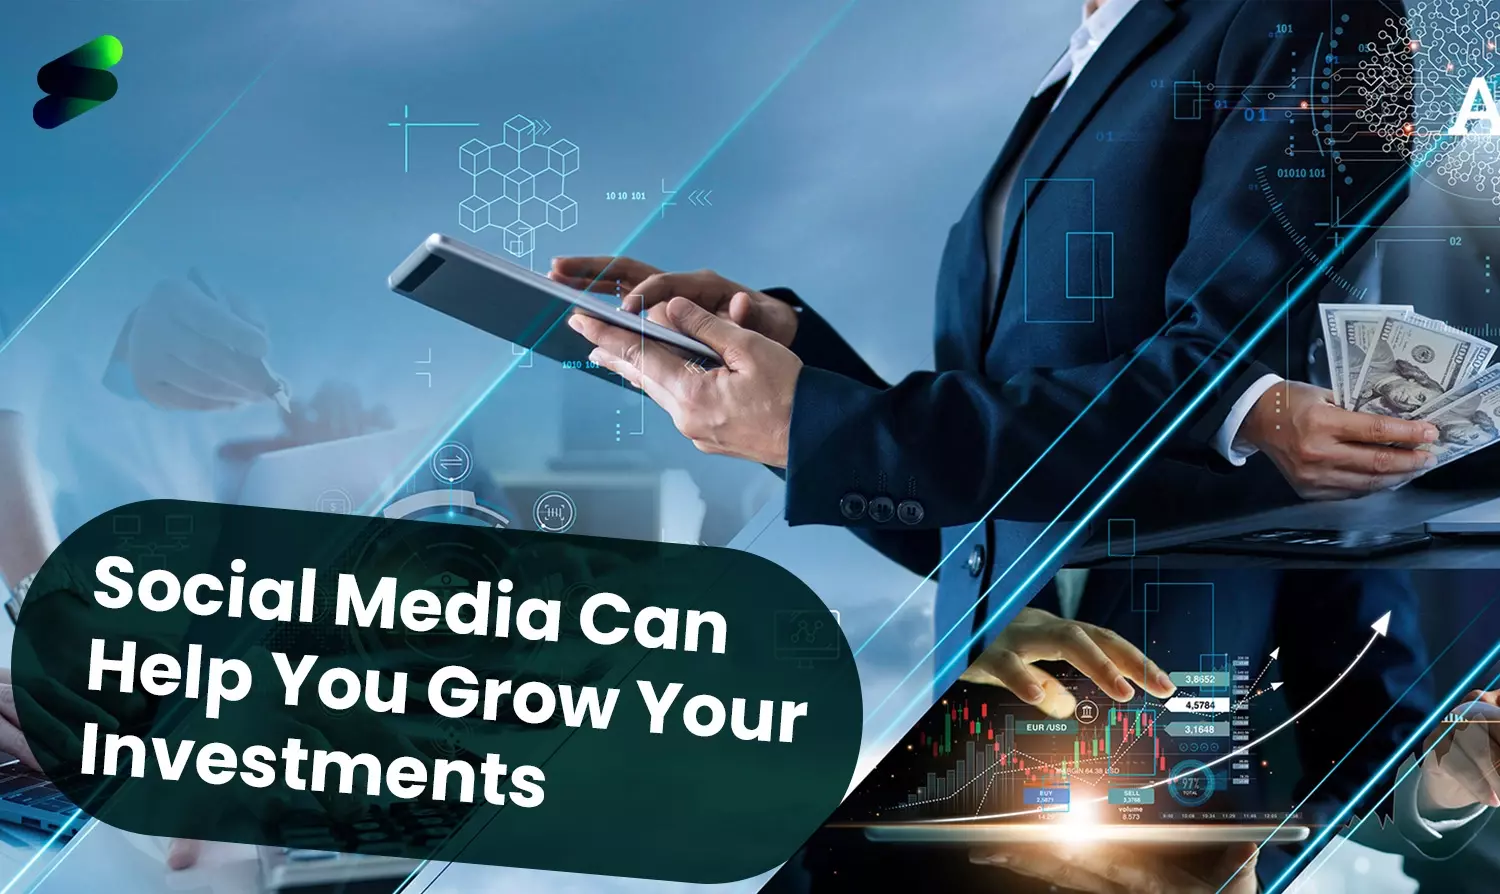 How Social Media Can Help You Grow Your Investments